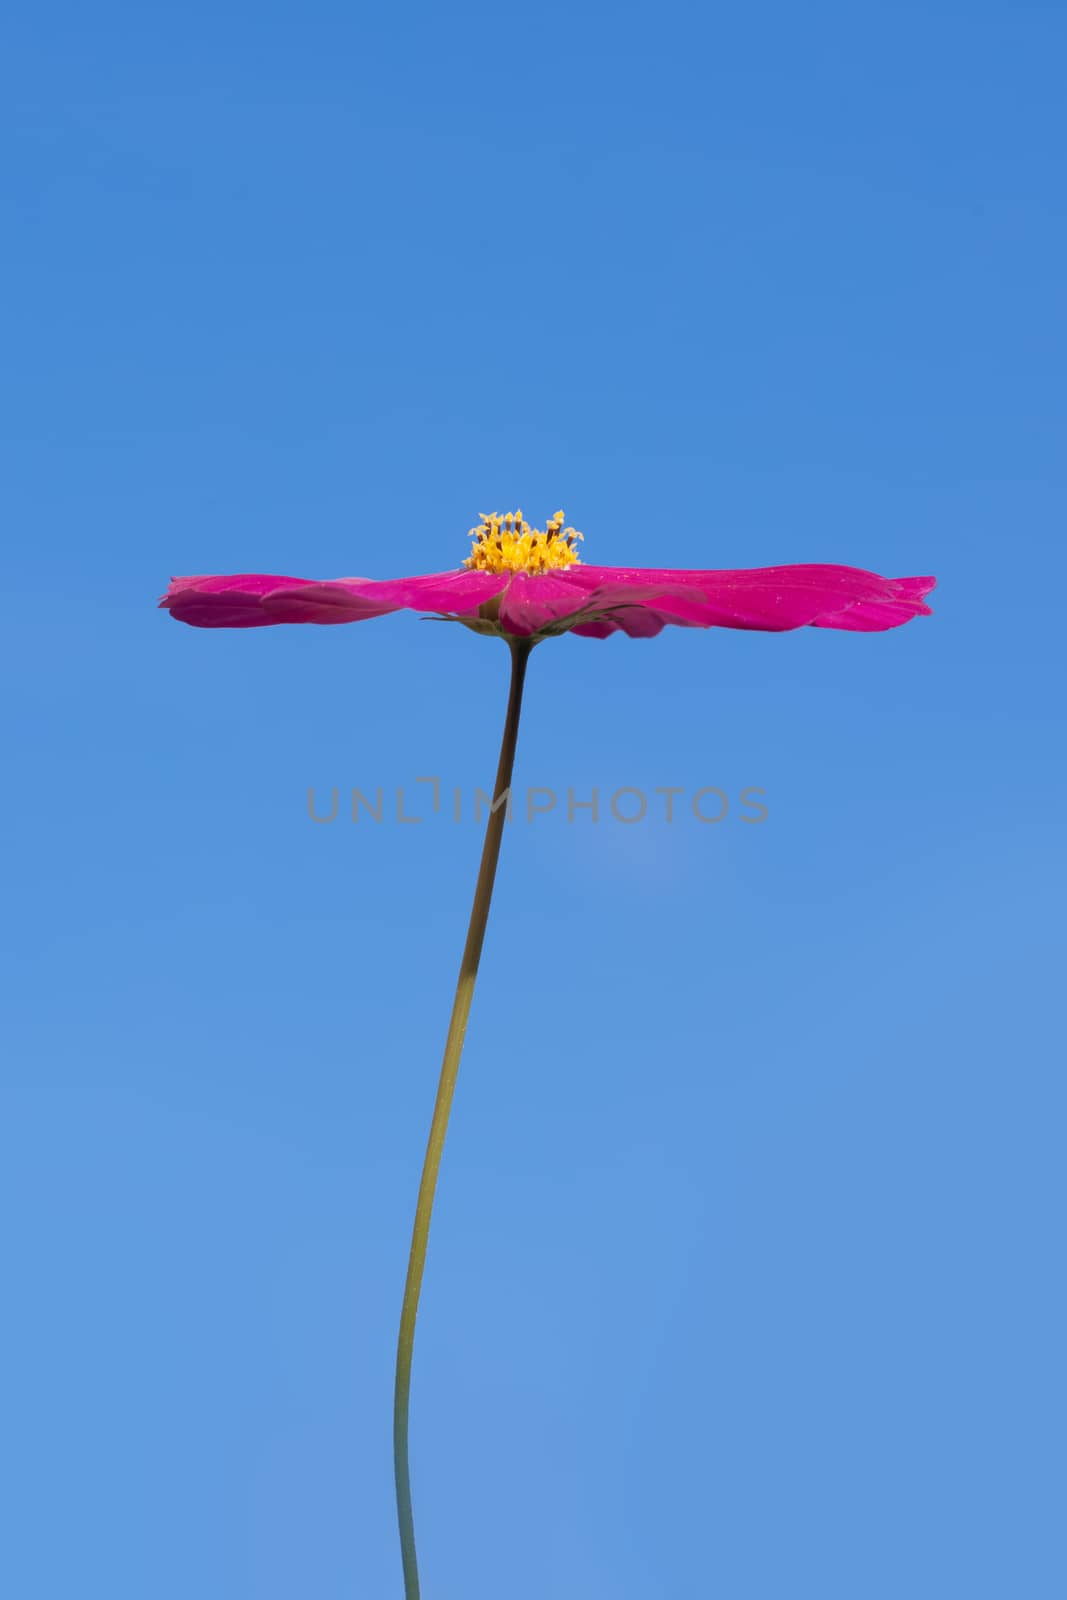 An image of a beautiful red Cosmos bipinnatus flower